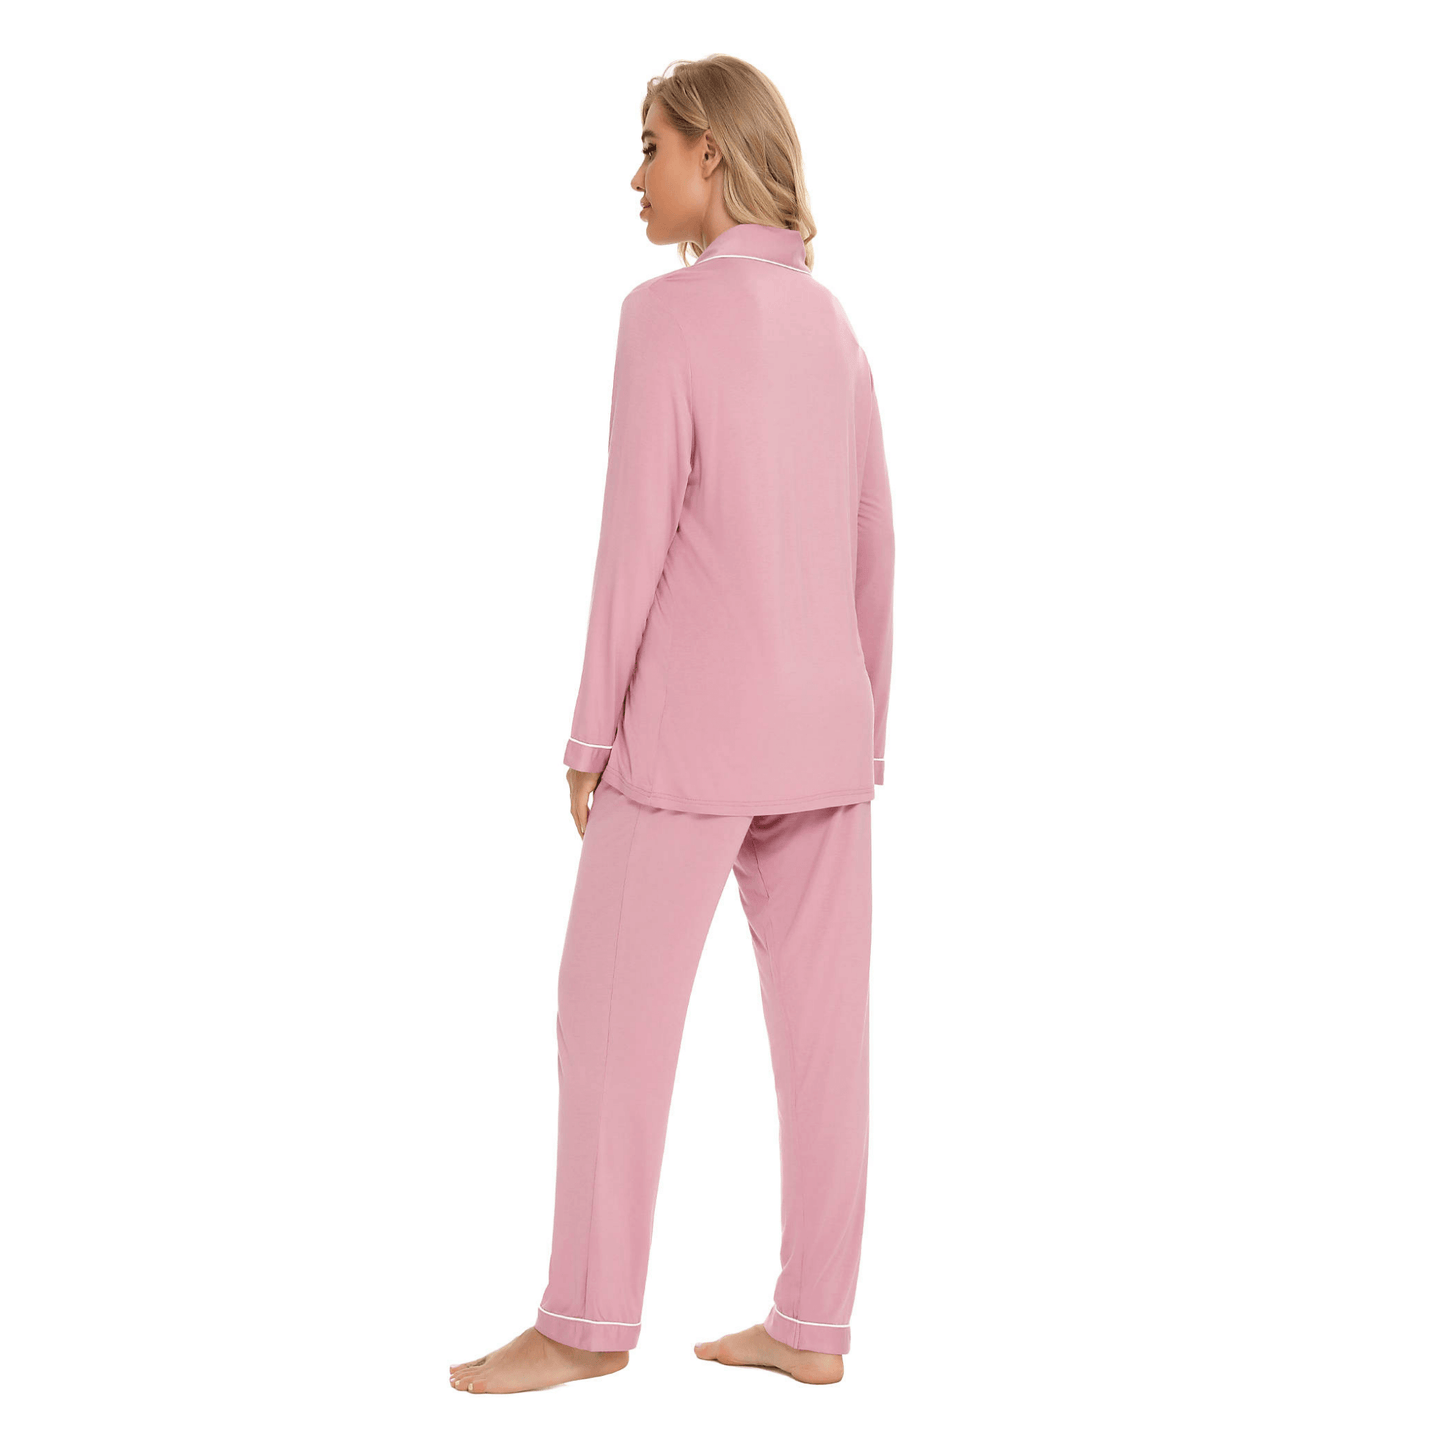 Soft and breathable bamboo pyjama sets in dusky pink